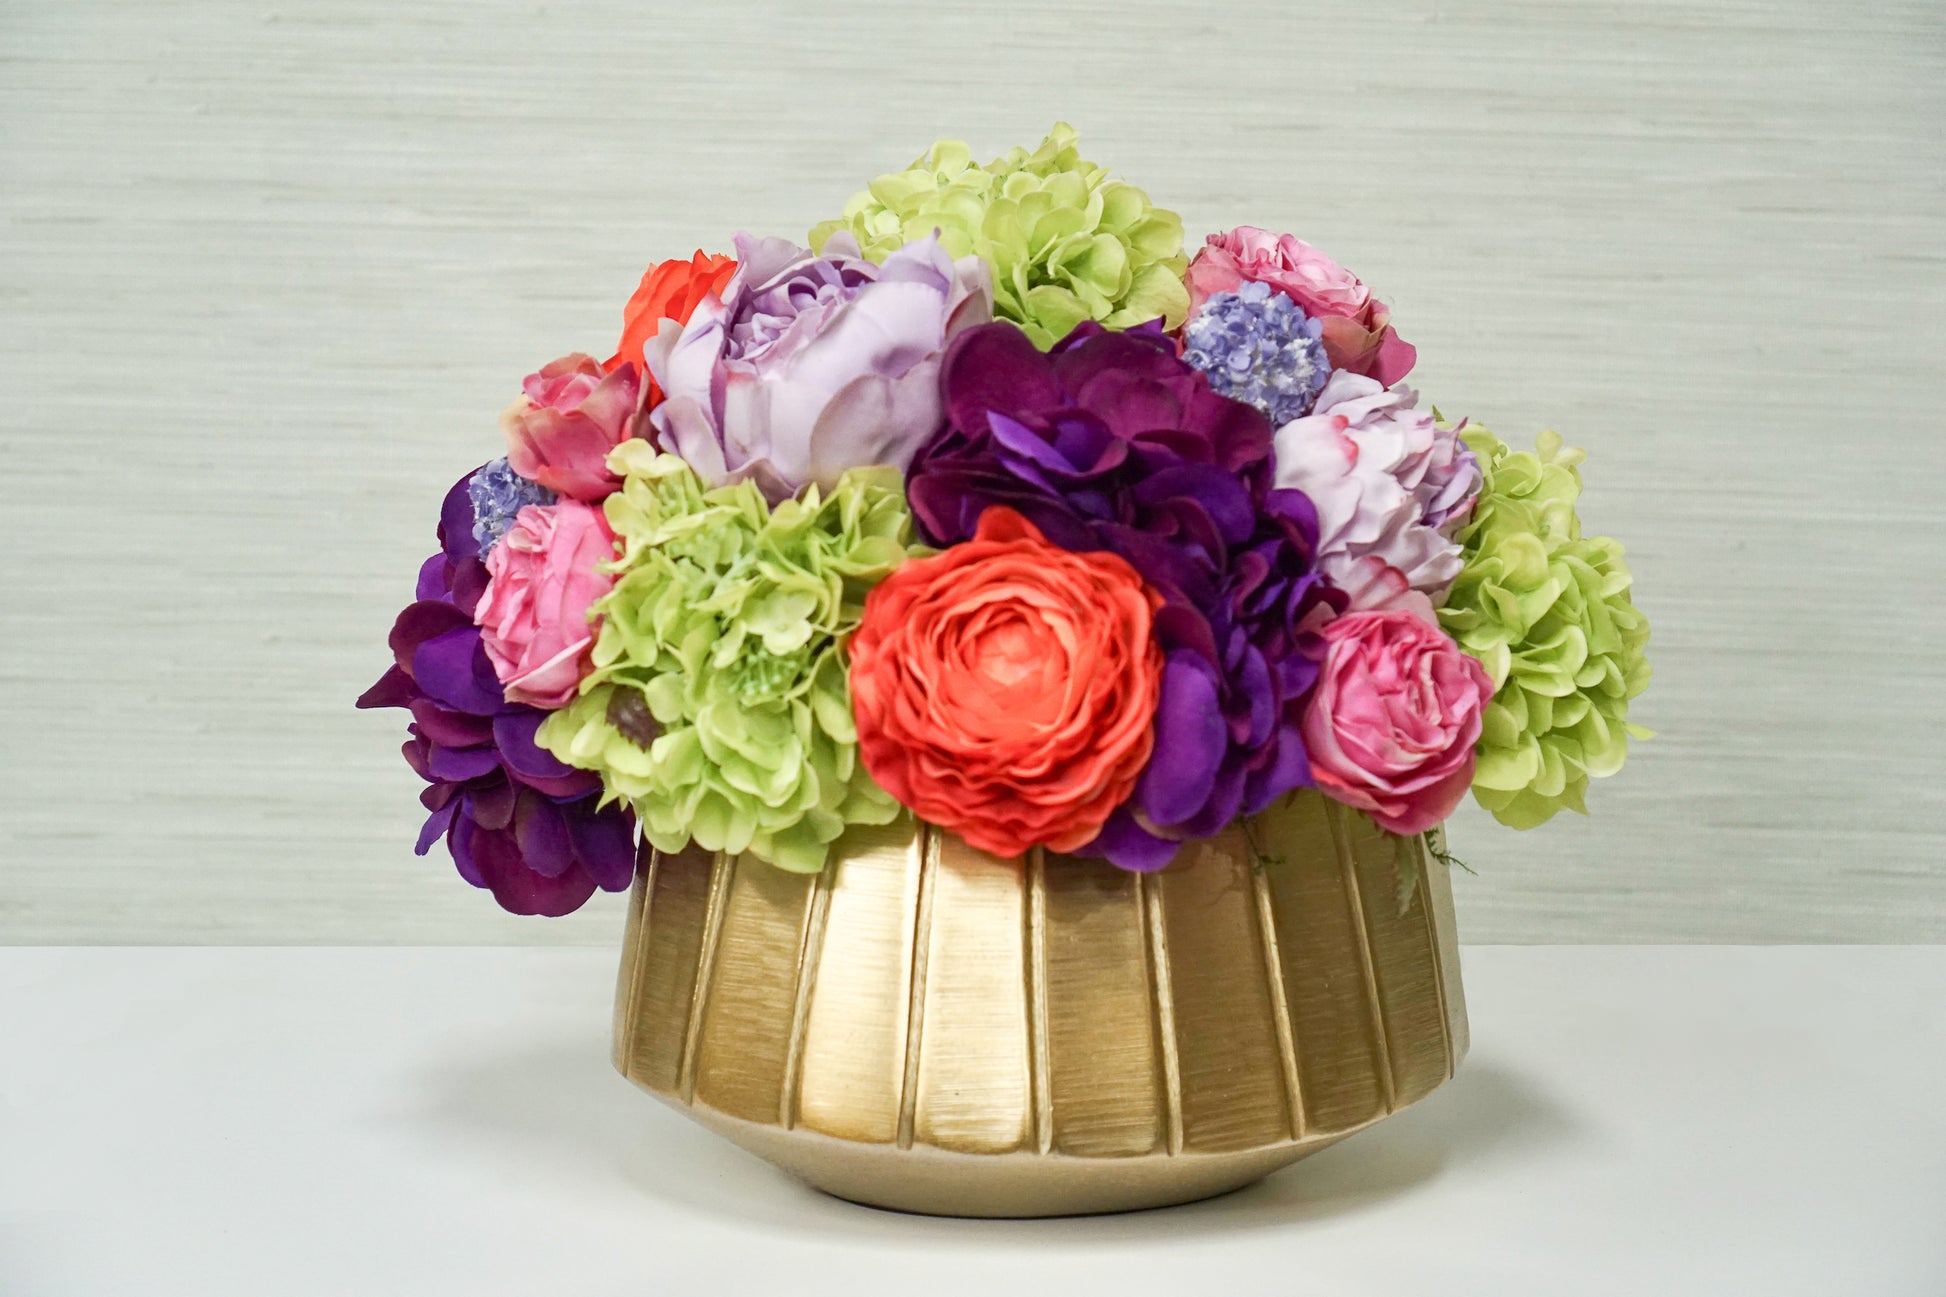 A beautiful centerpiece of bright and colorful faux flowers including green hydrangea, pink roses, and other orange and purple blossoms.